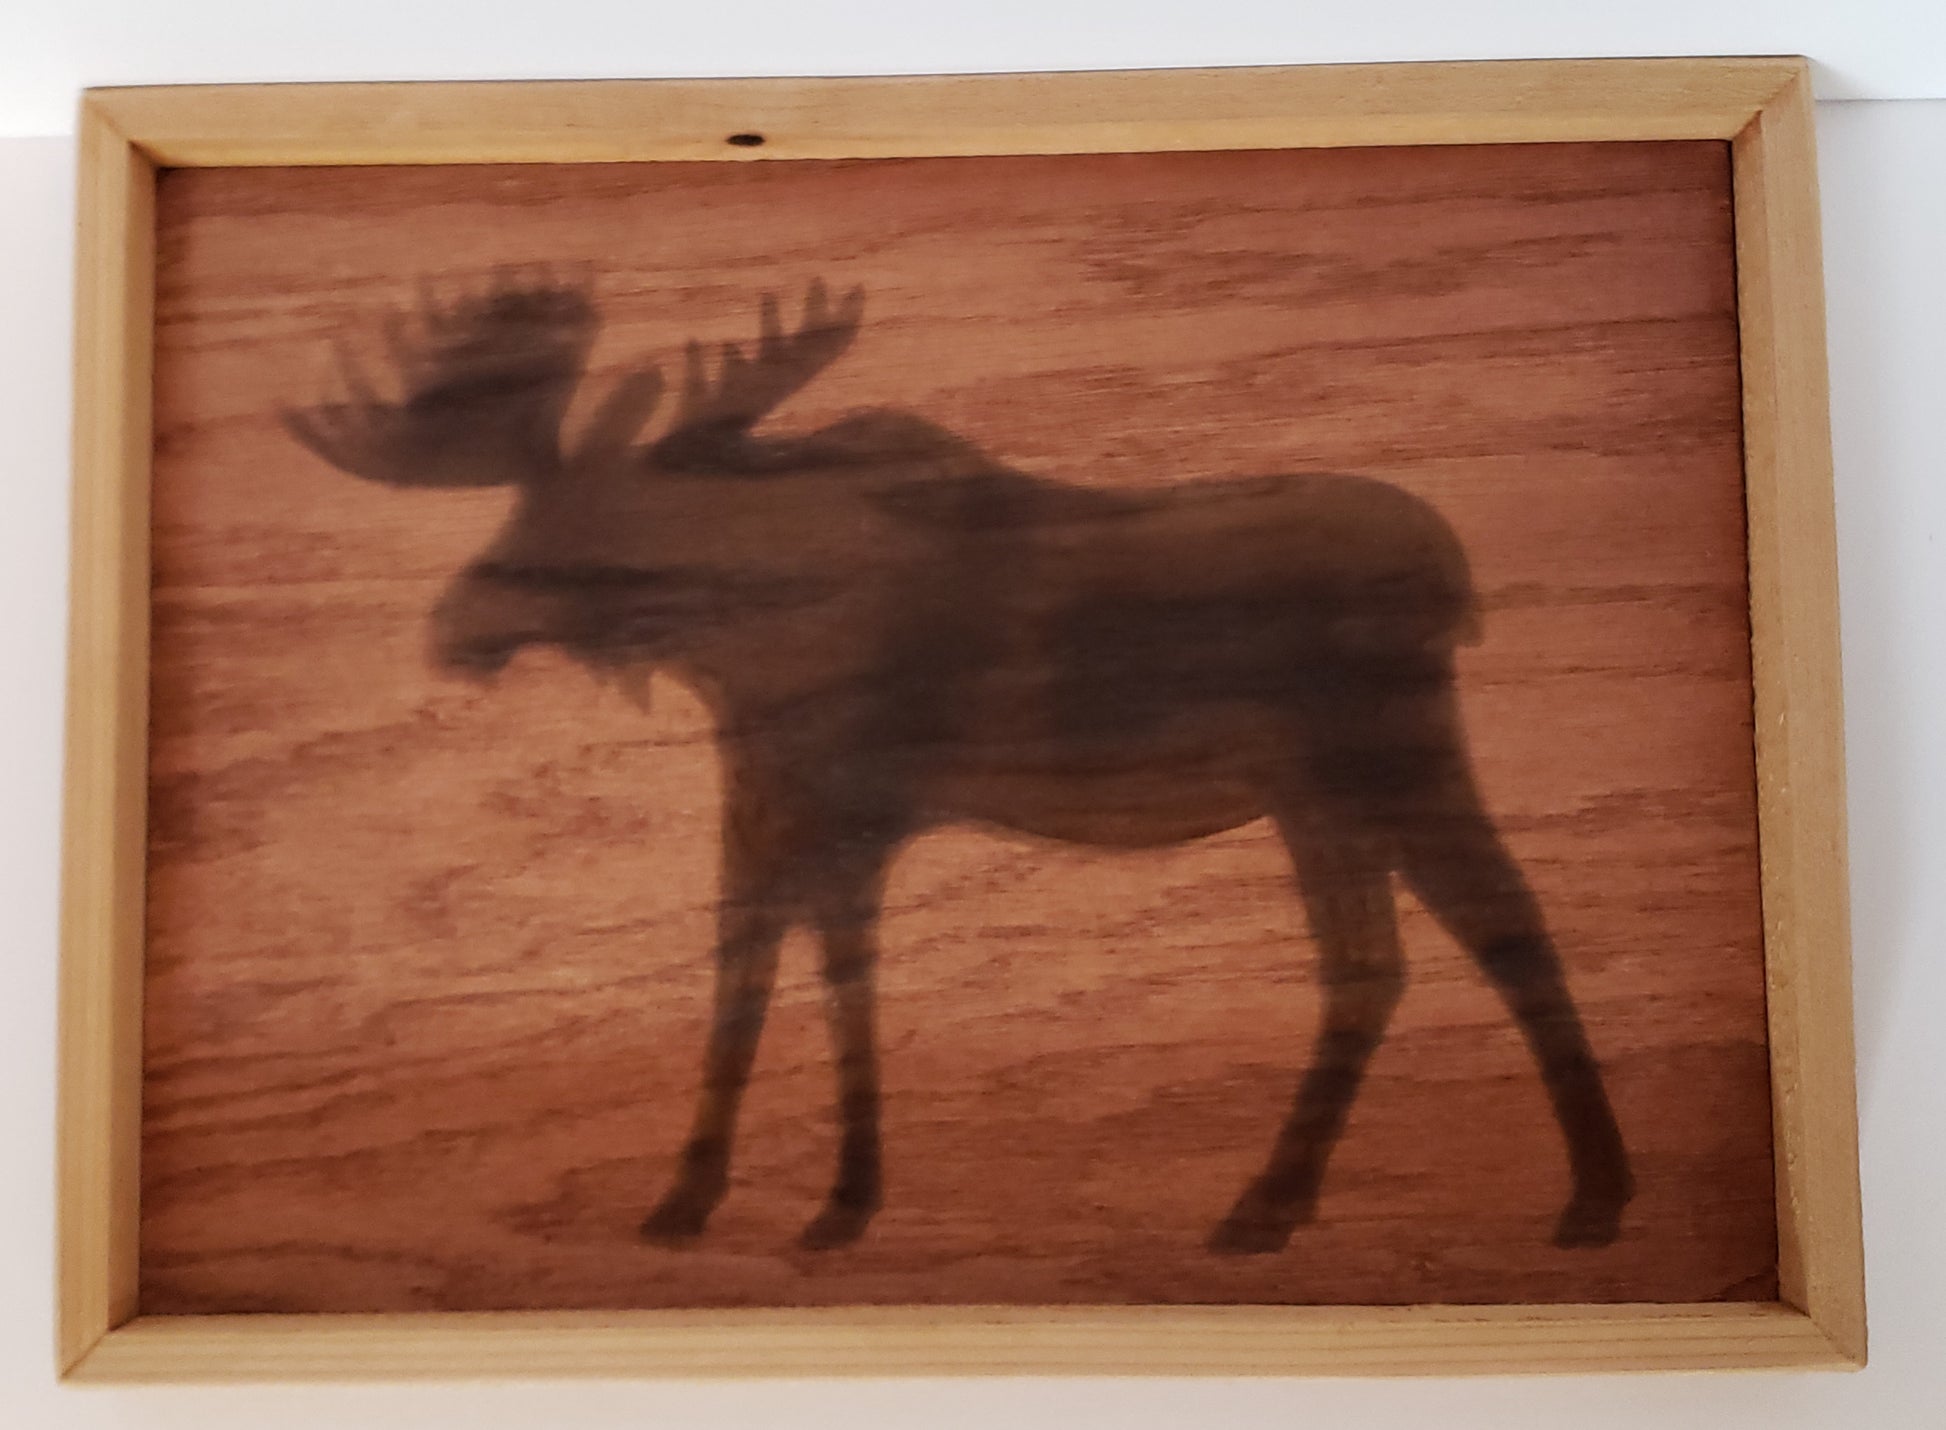 Wood Burned Moose Framed Wall Art Artist: Michael McMahon  Hardwood plywood sanded and burned with Moose Silhouette  Stained redwood and polyurethane coated  Natural cedar wood frame  Wire hanger on the back  17" long x 13" high x 1.5" wide  Would be perfect for a cabin or for any outdoorsman